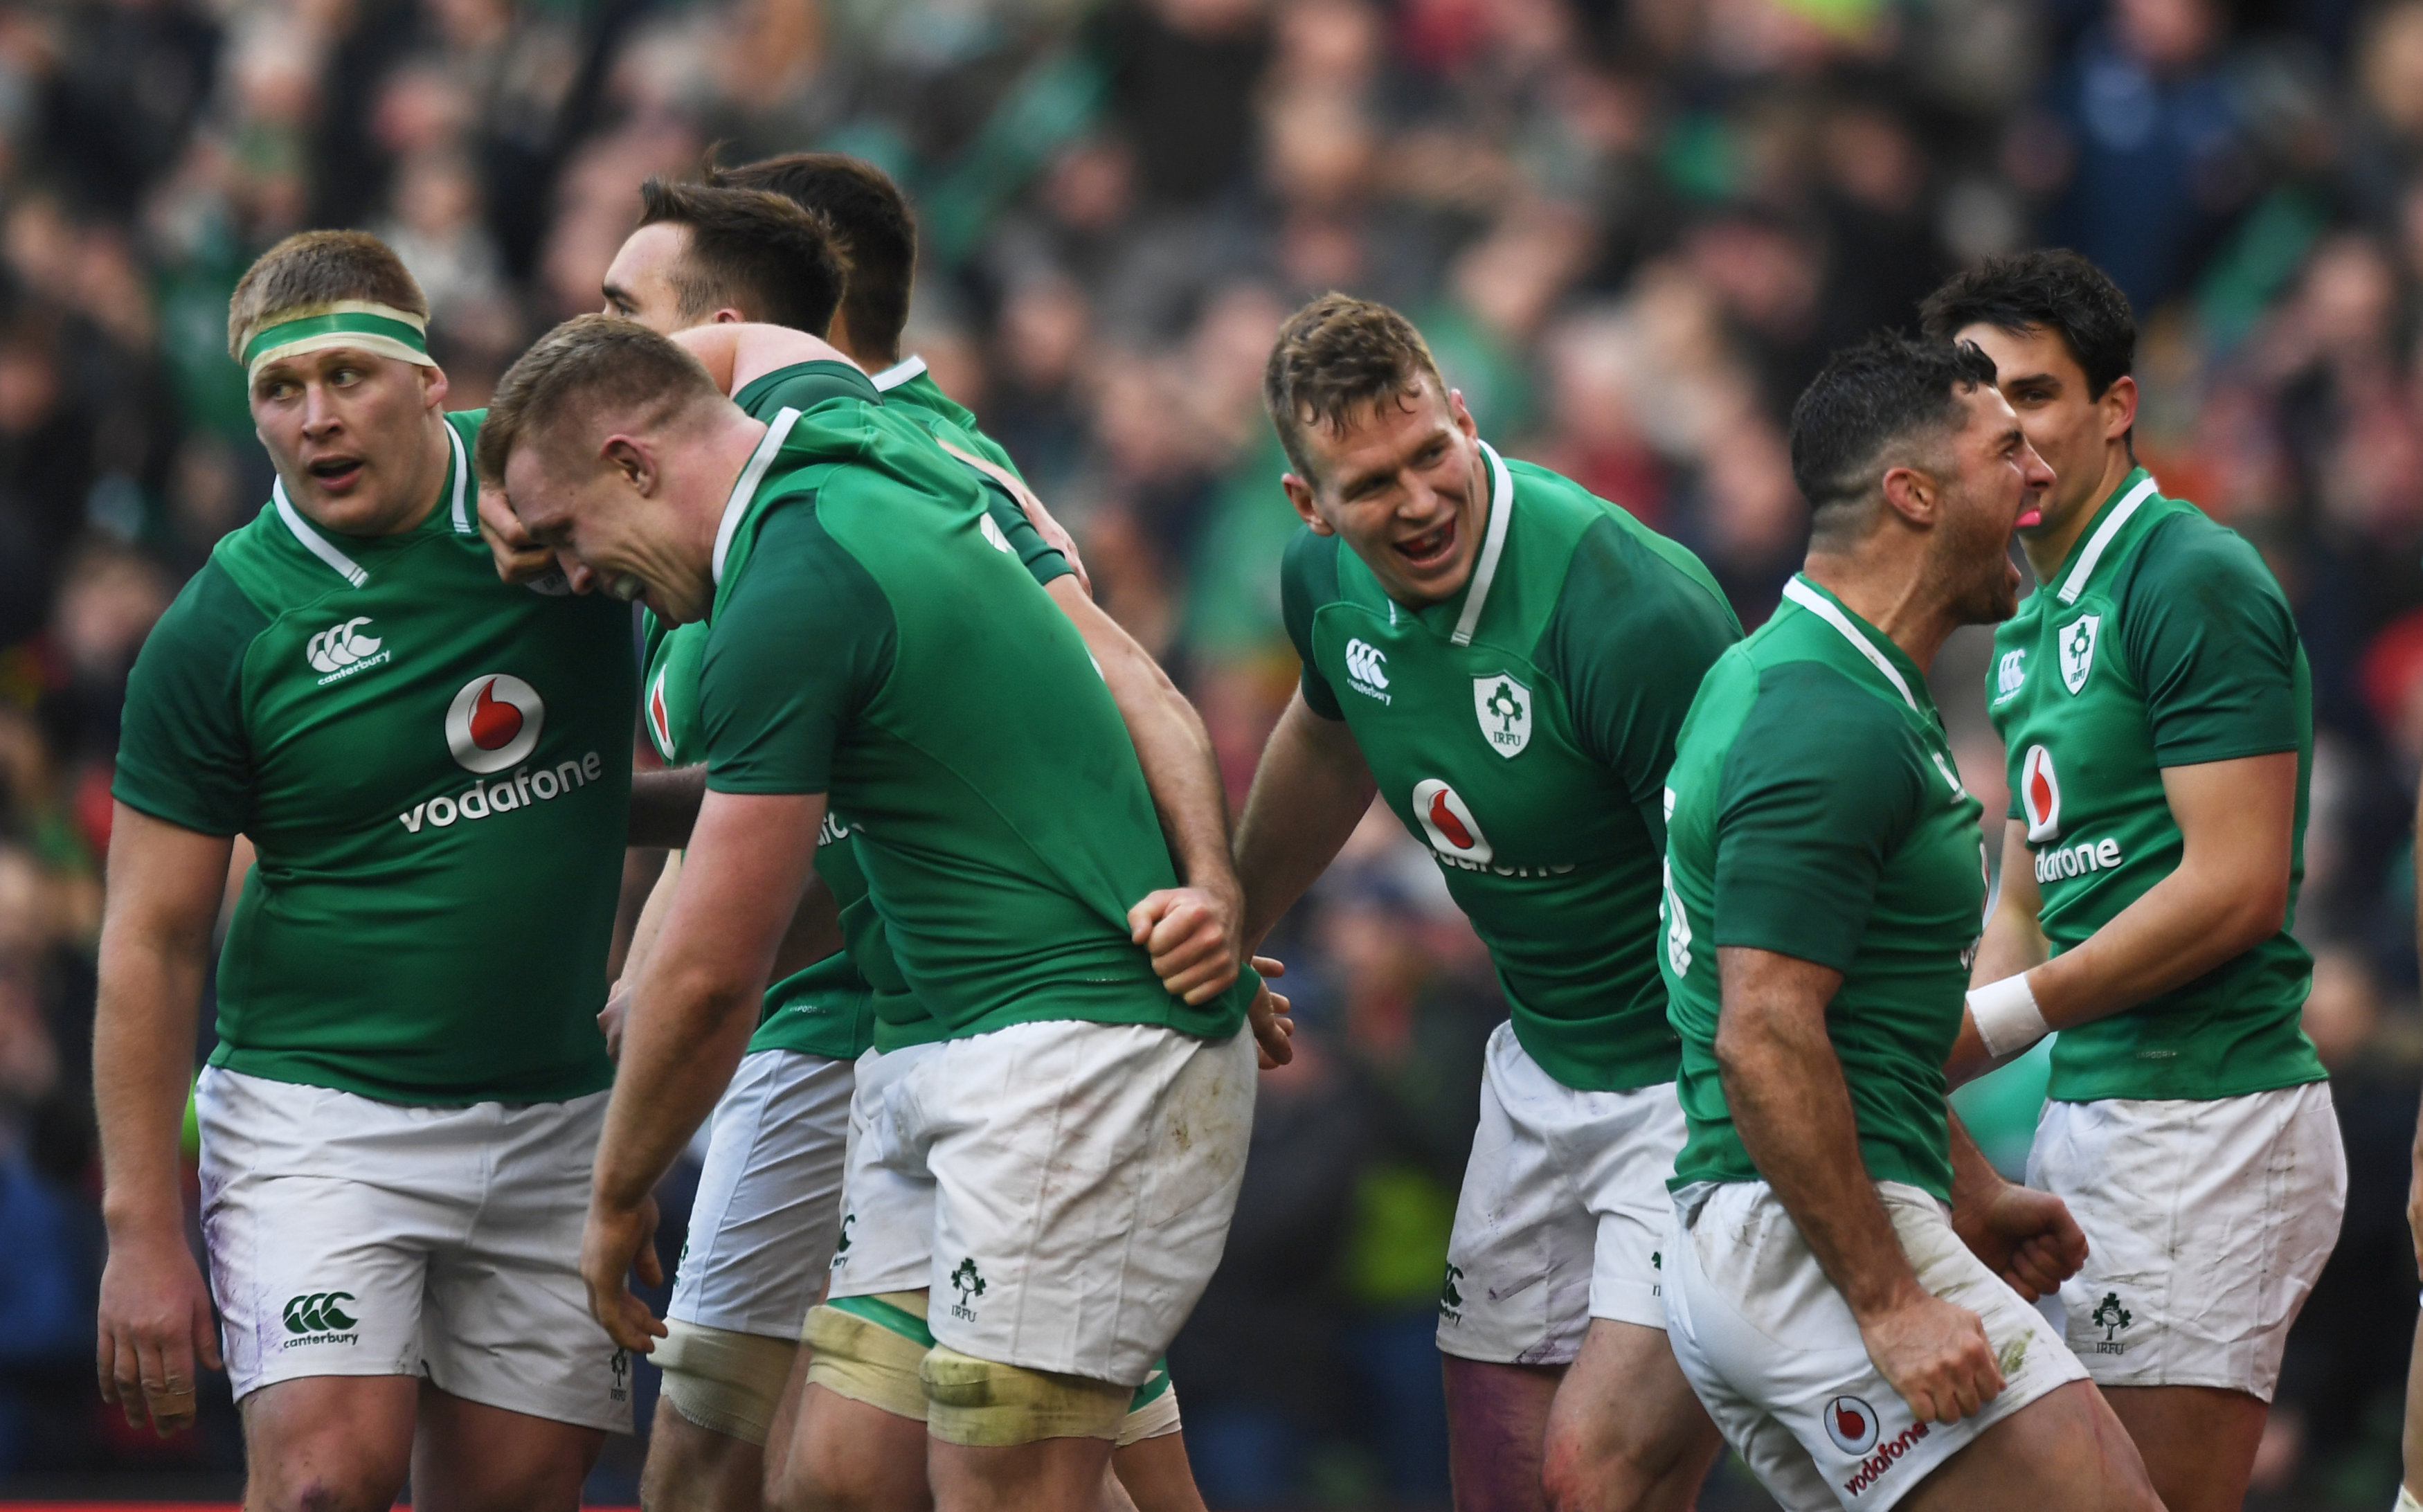 Rugby: Ireland maintain perfect start in wild win over Wales